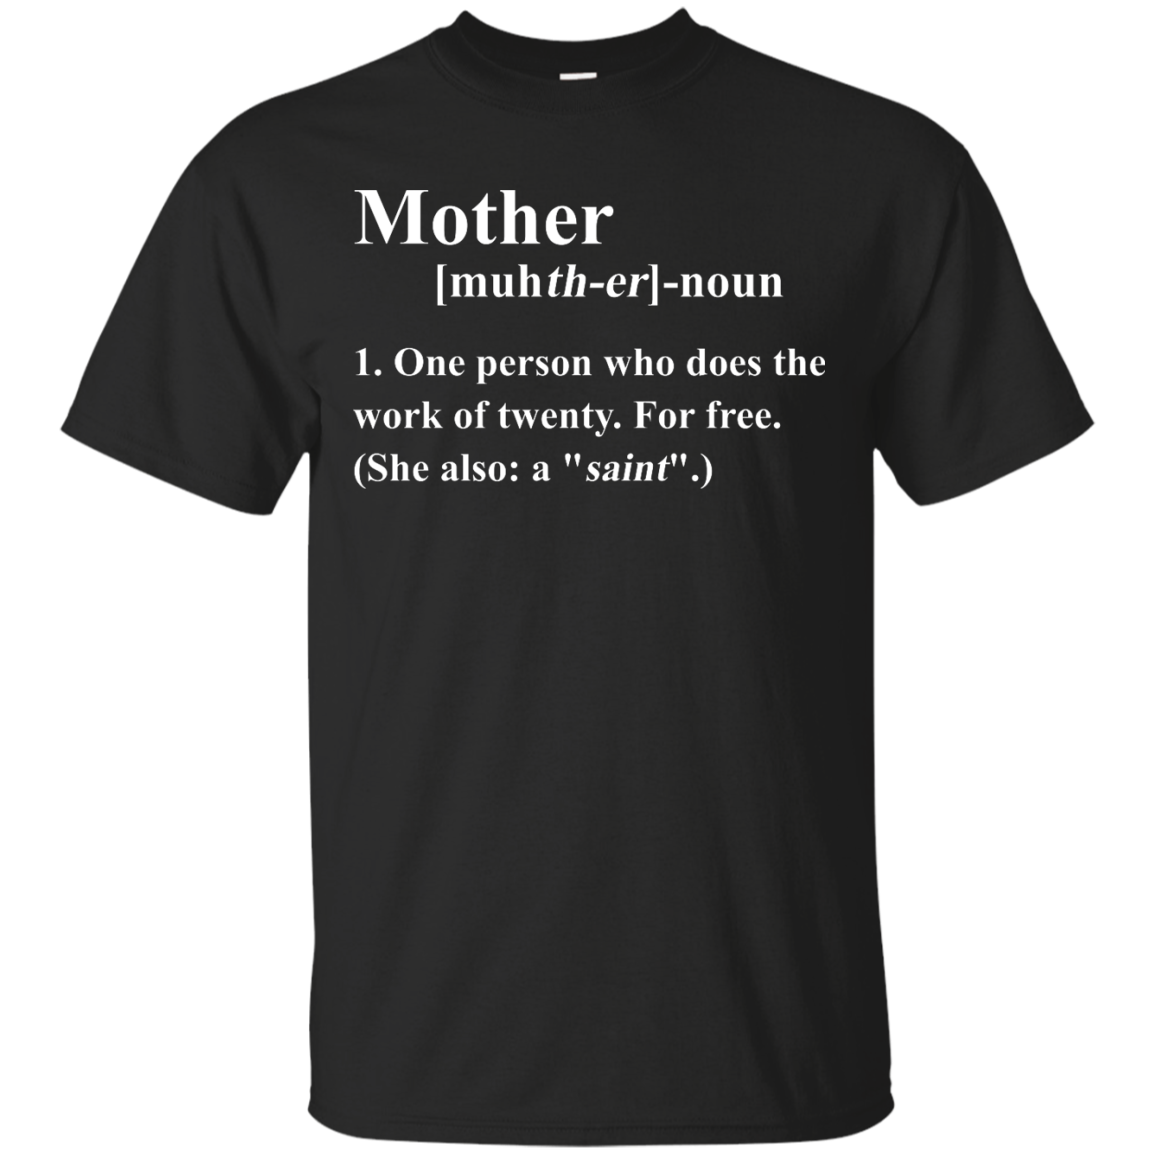 Mother Definition  Shirt - One Person Who Does The Work Of Twenty